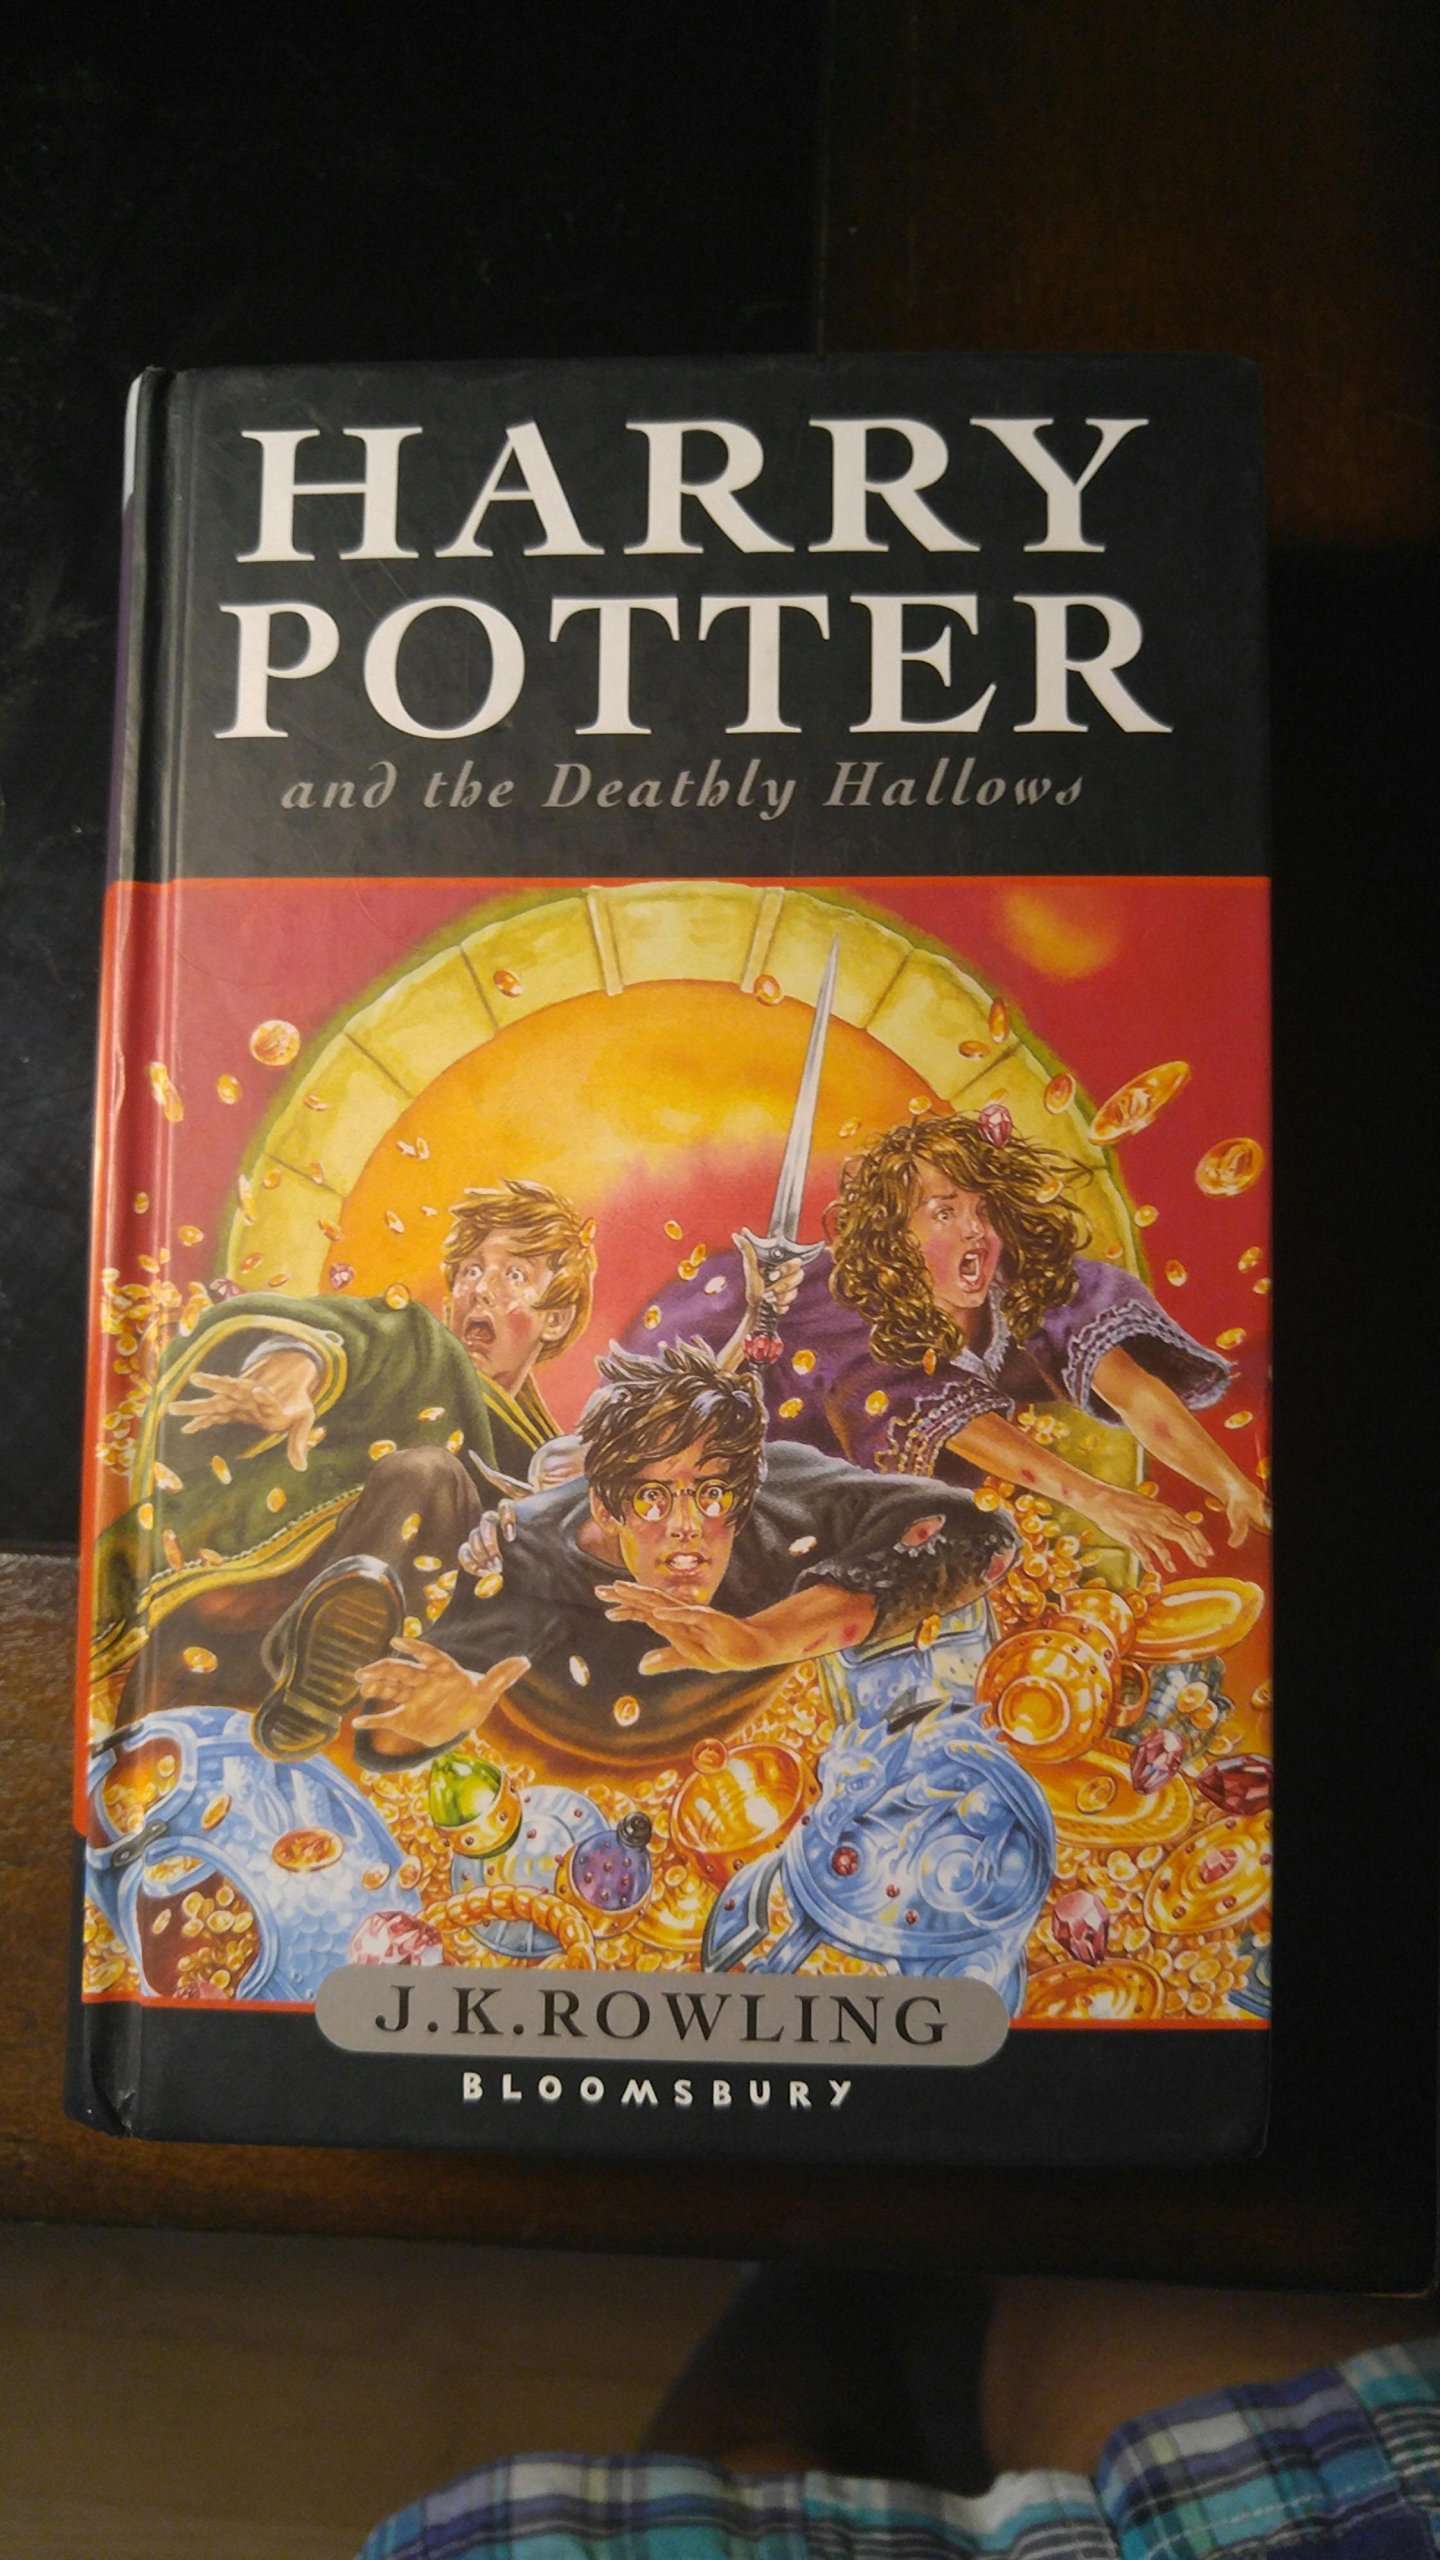 Harry potter and the deathly hallows british book cover ...